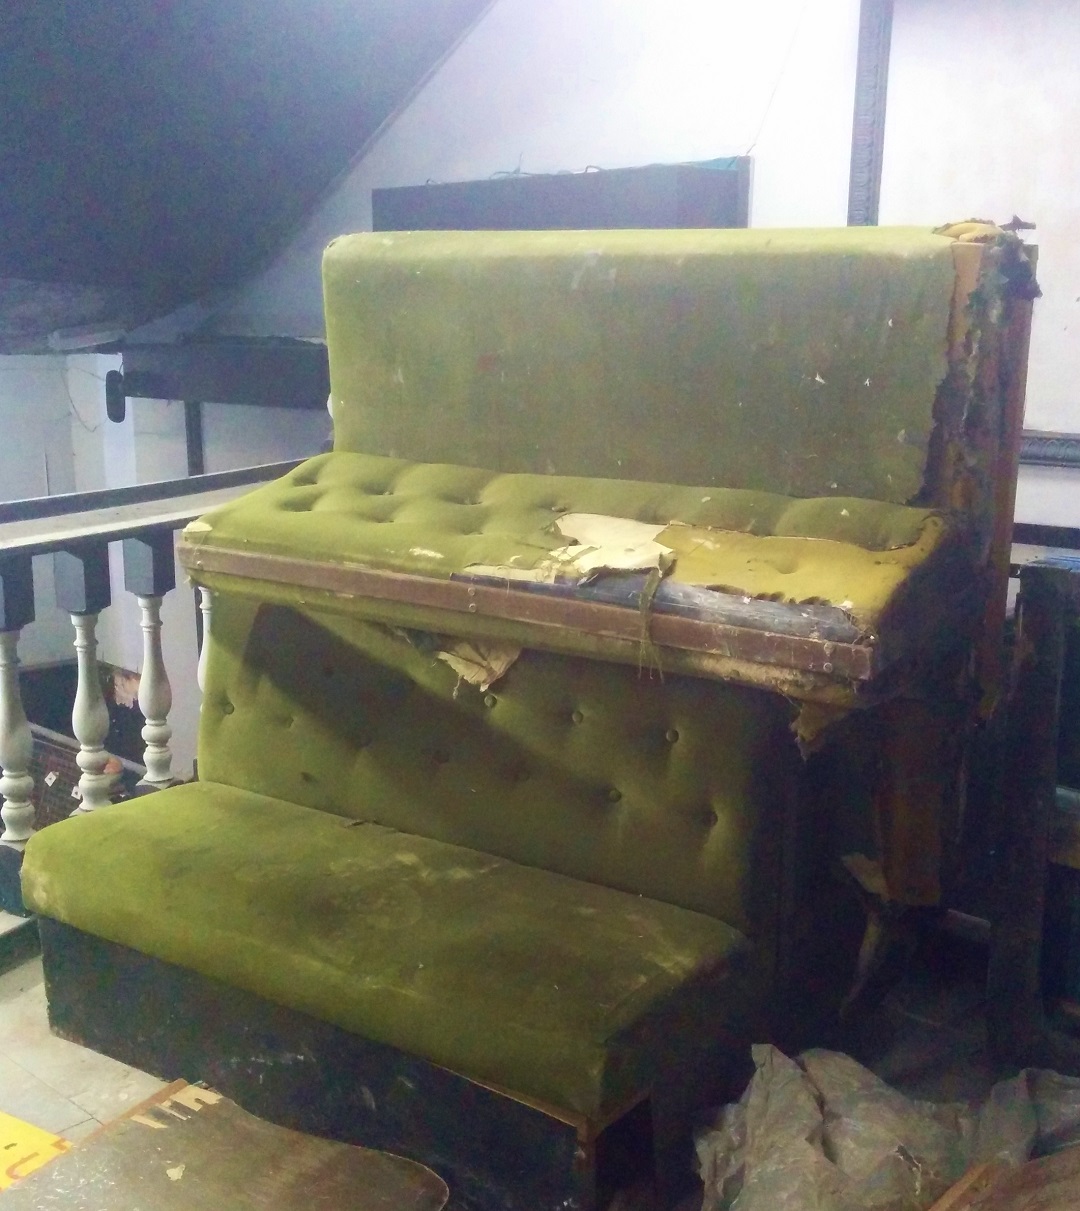 relic-palace-theatre-plymouth-seats-cushions-pile